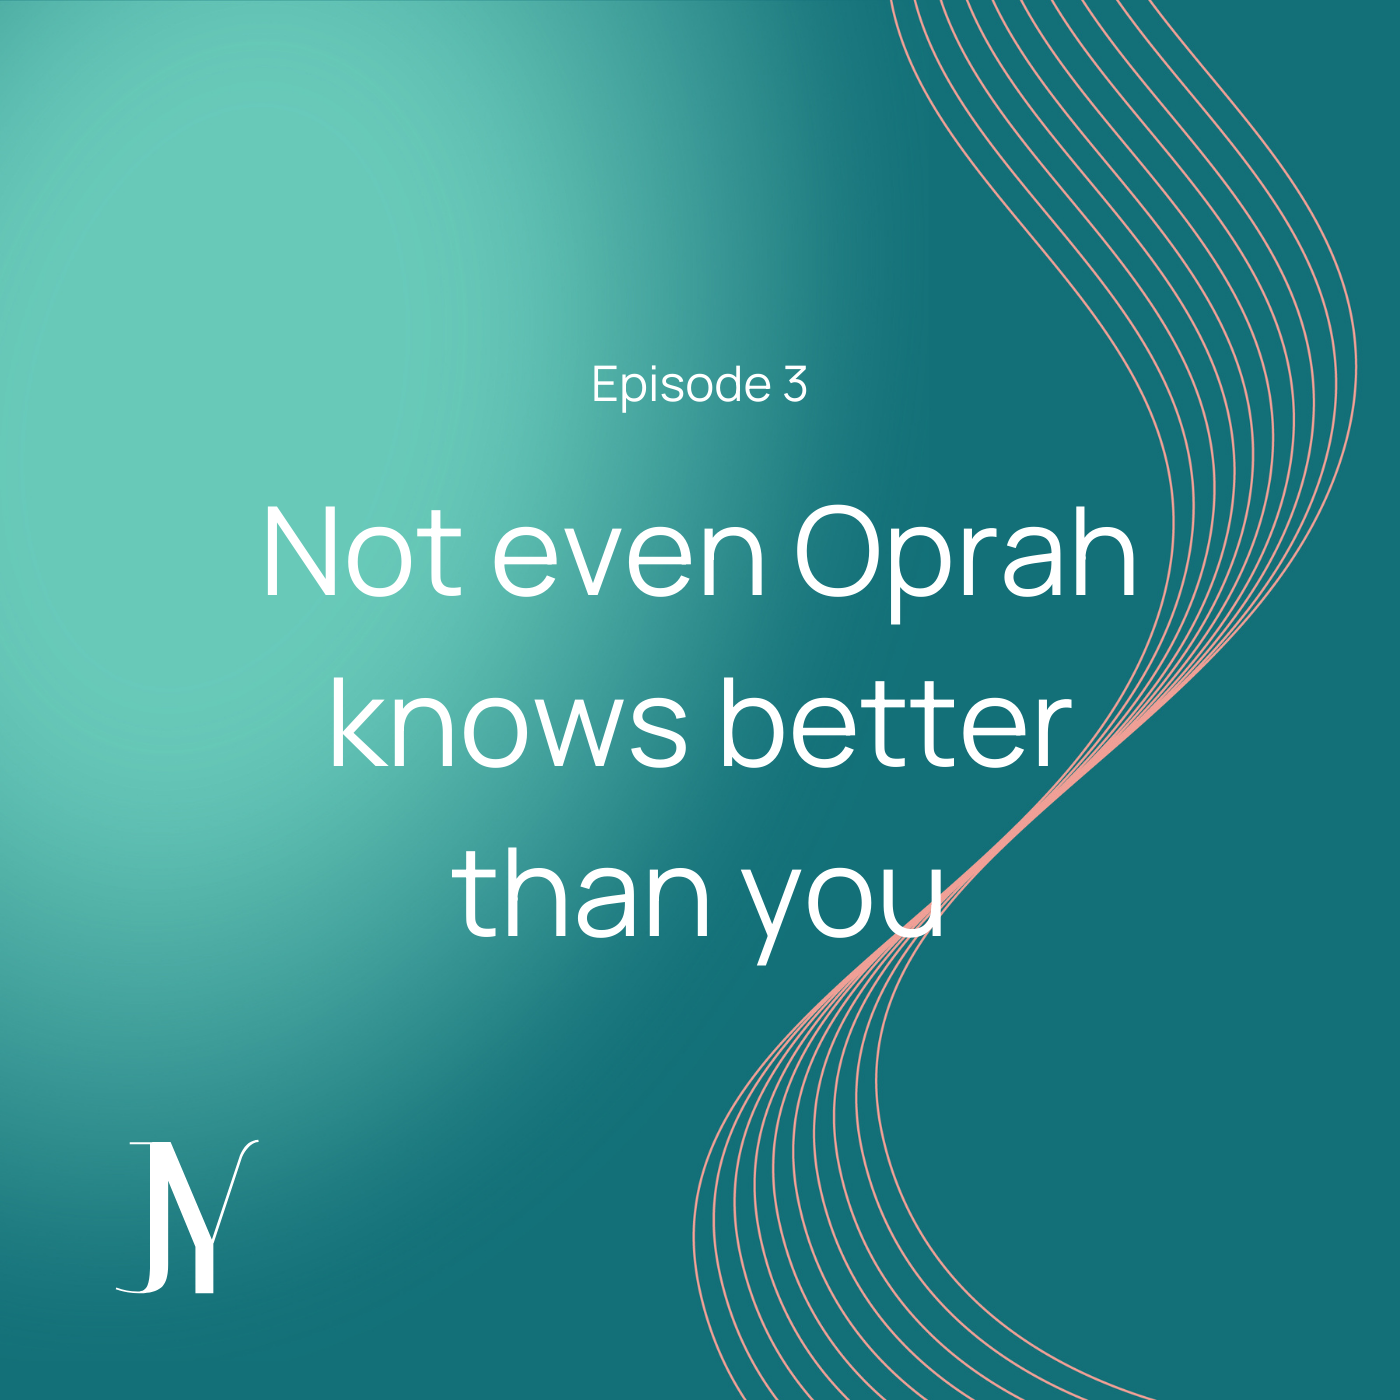 Not even Oprah knows better than you_Jennifer Jane Young_Intuitive Business